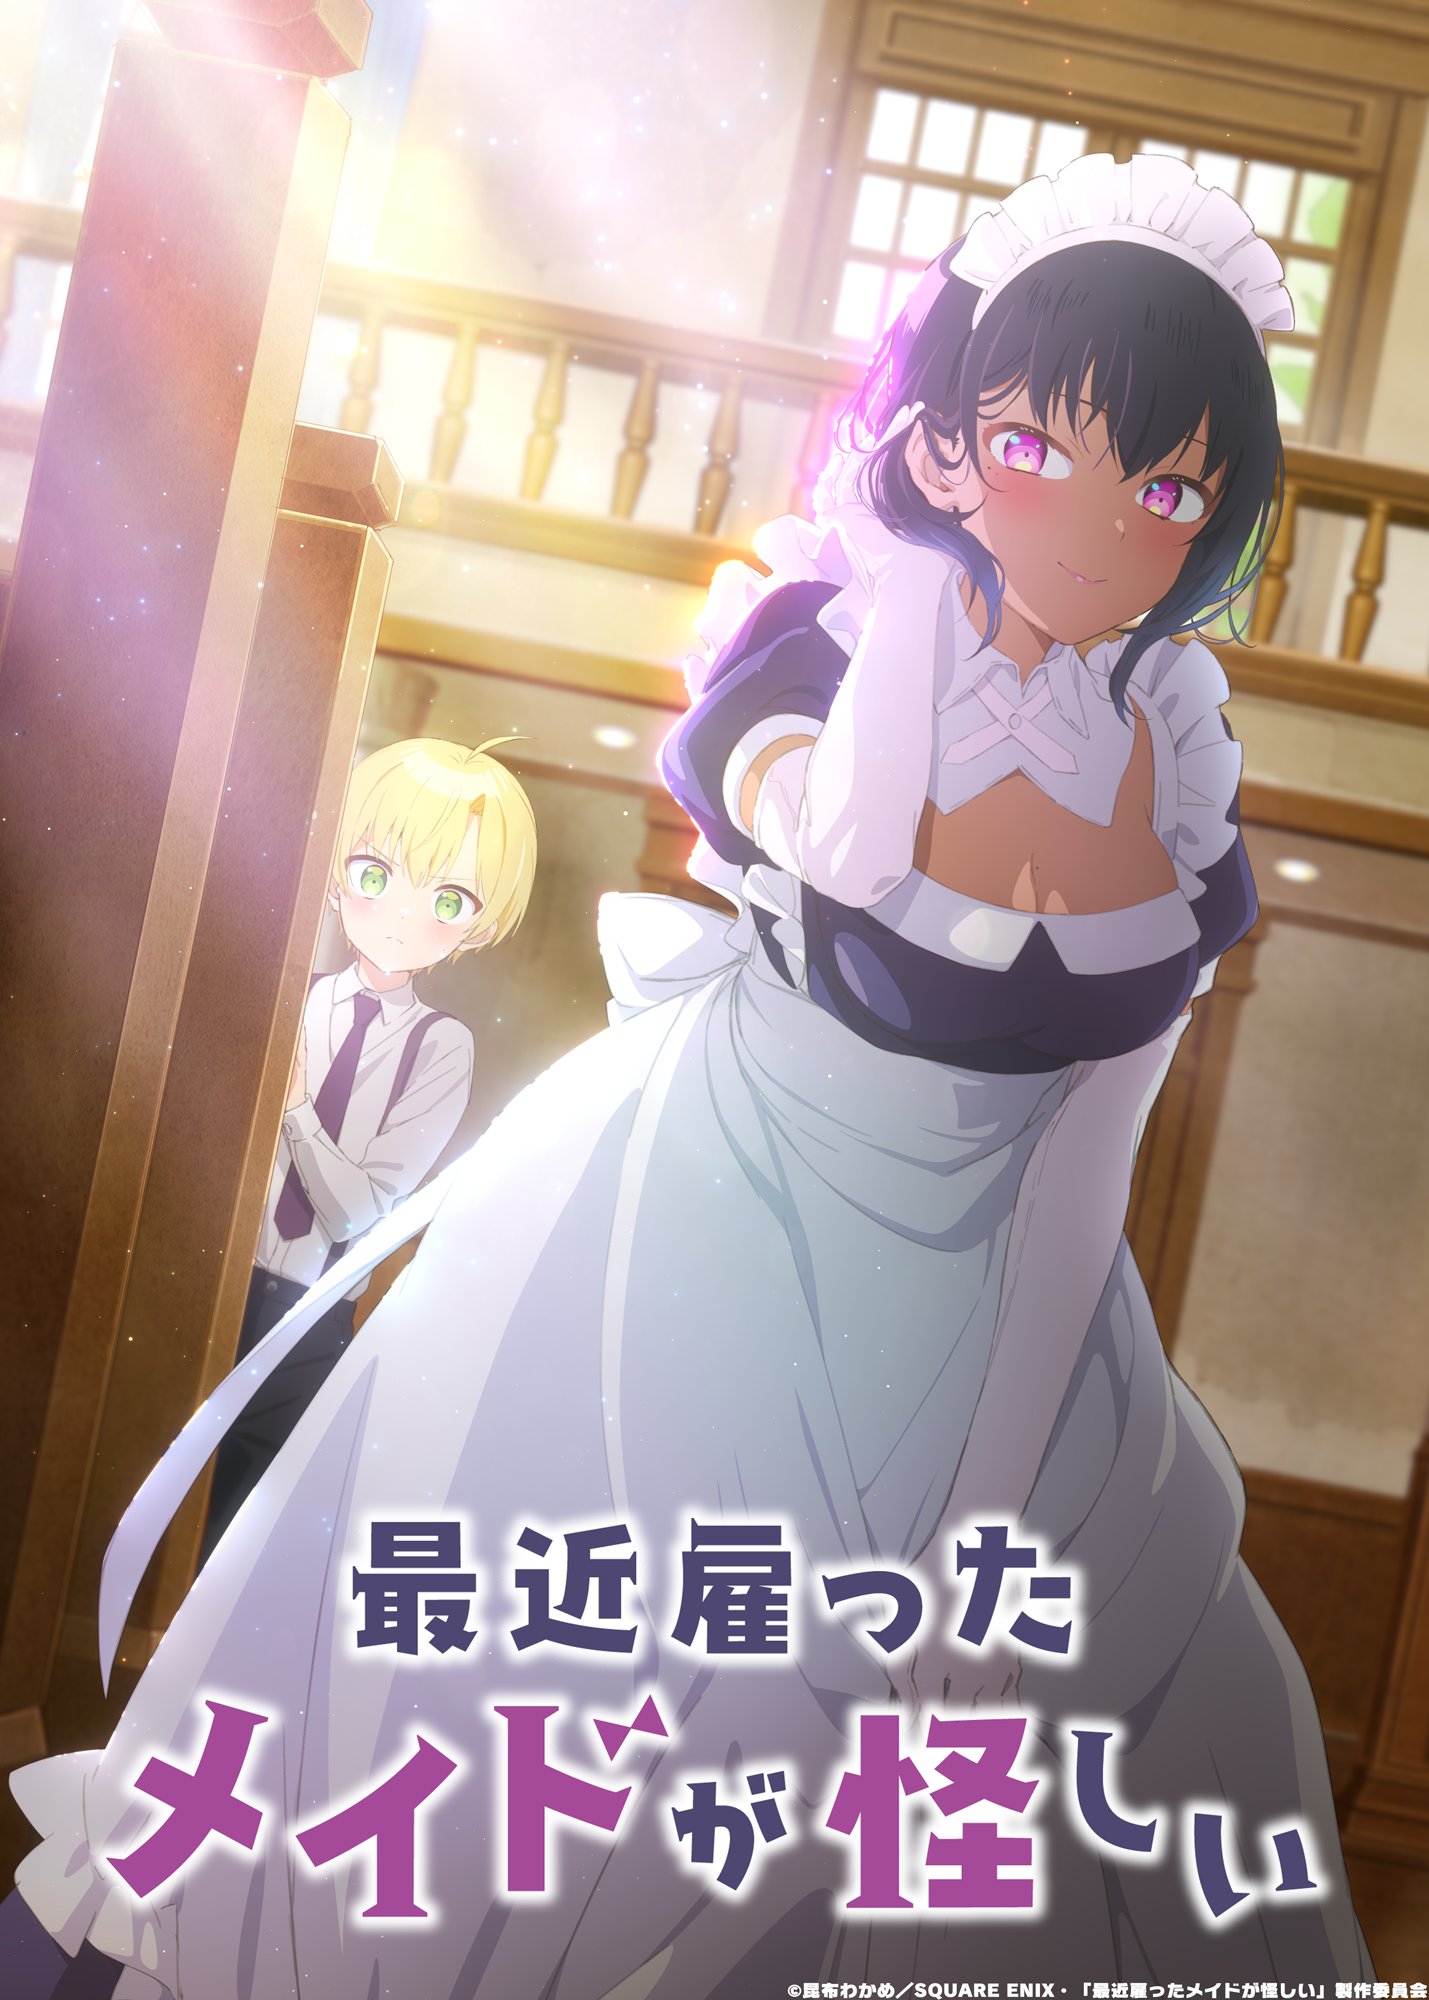 Crunchyroll - The Maid I Hired Recently Is Mysterious Announces TV Anime  for Summer 2022